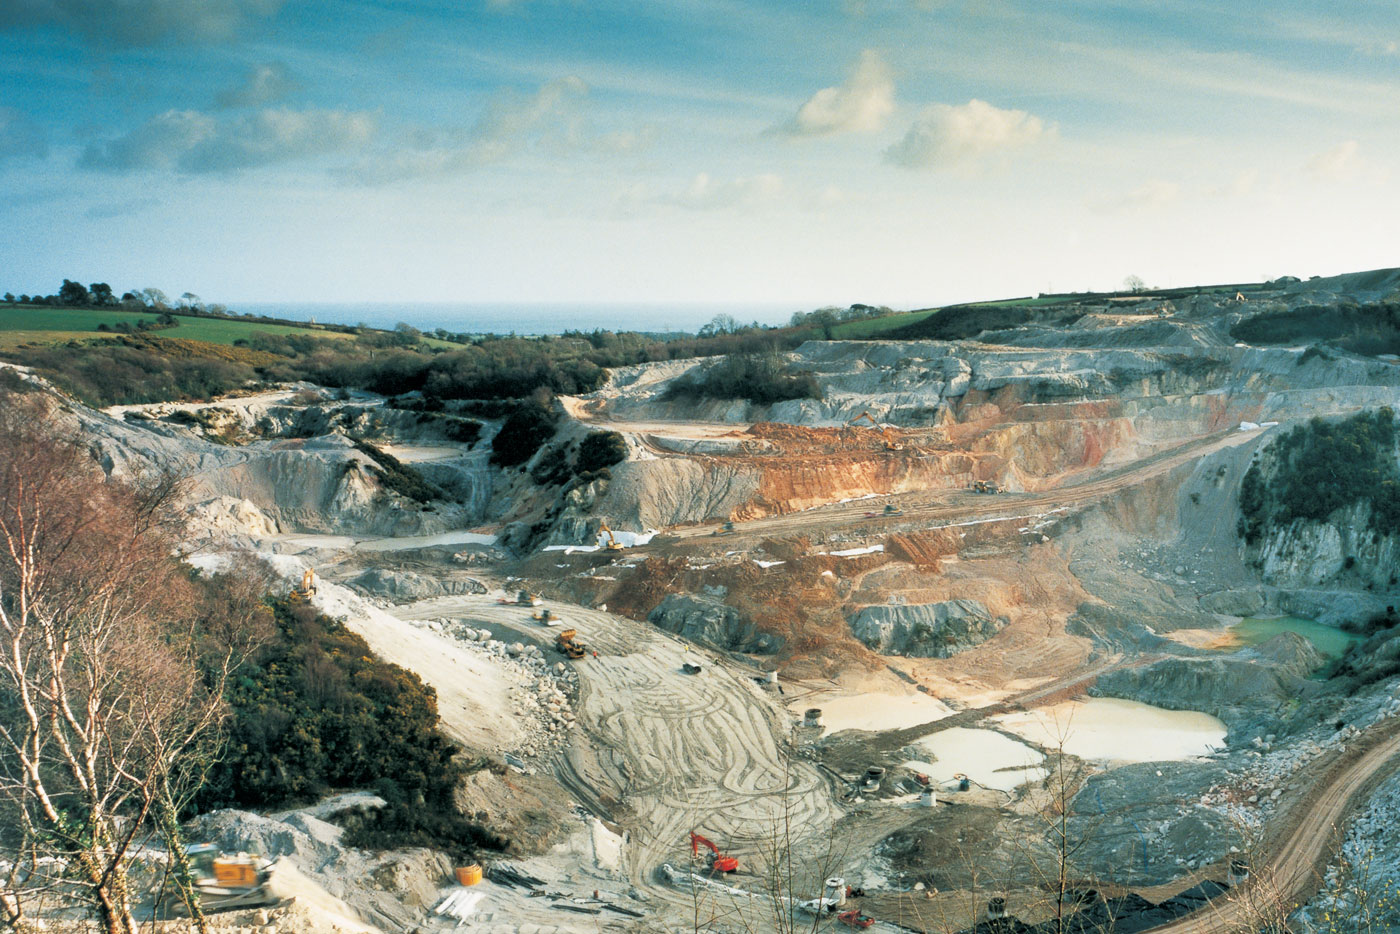 Land before Eden: The bare kaolin clay pit mine outside of St. Austell, Cornwall before the Eden project was built